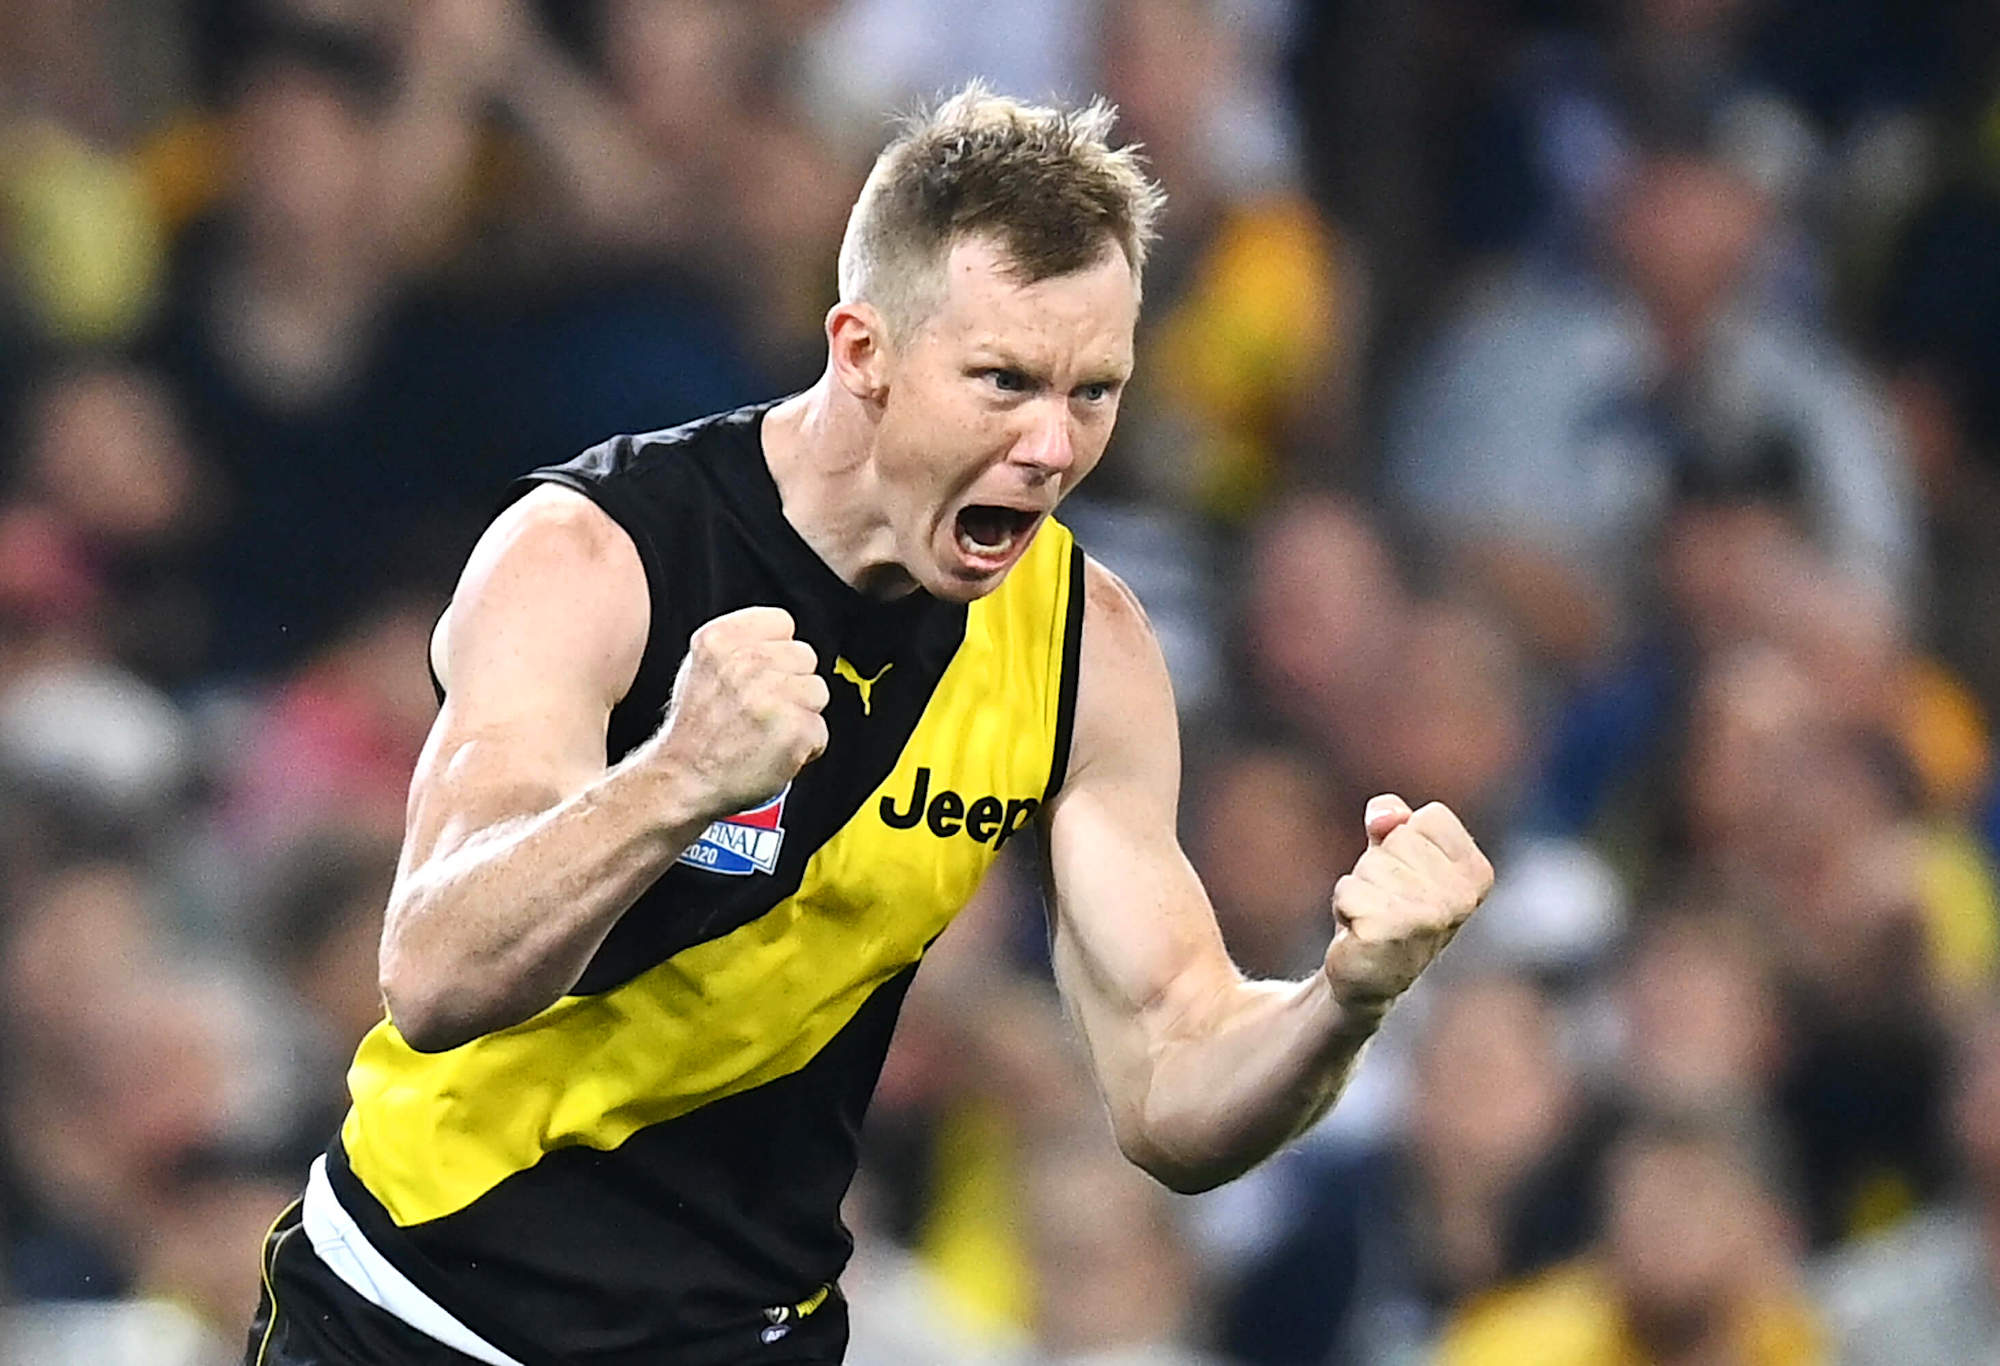 Jack Riewoldt of the Tigers celebrates